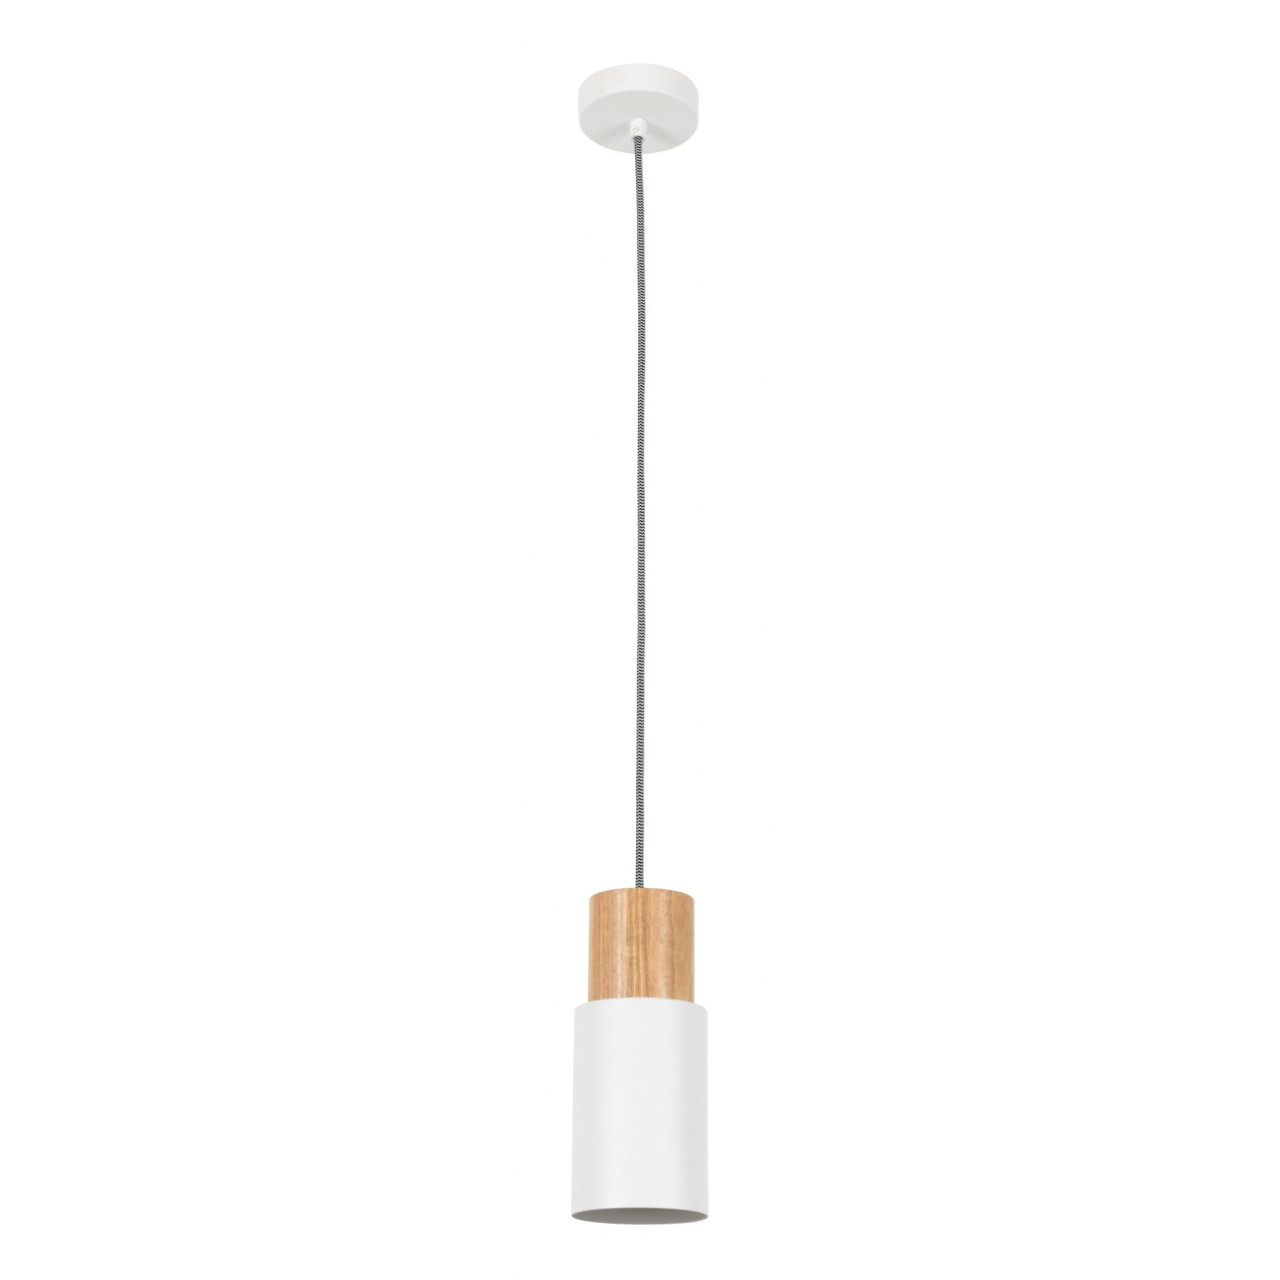 White with wood trim pendant